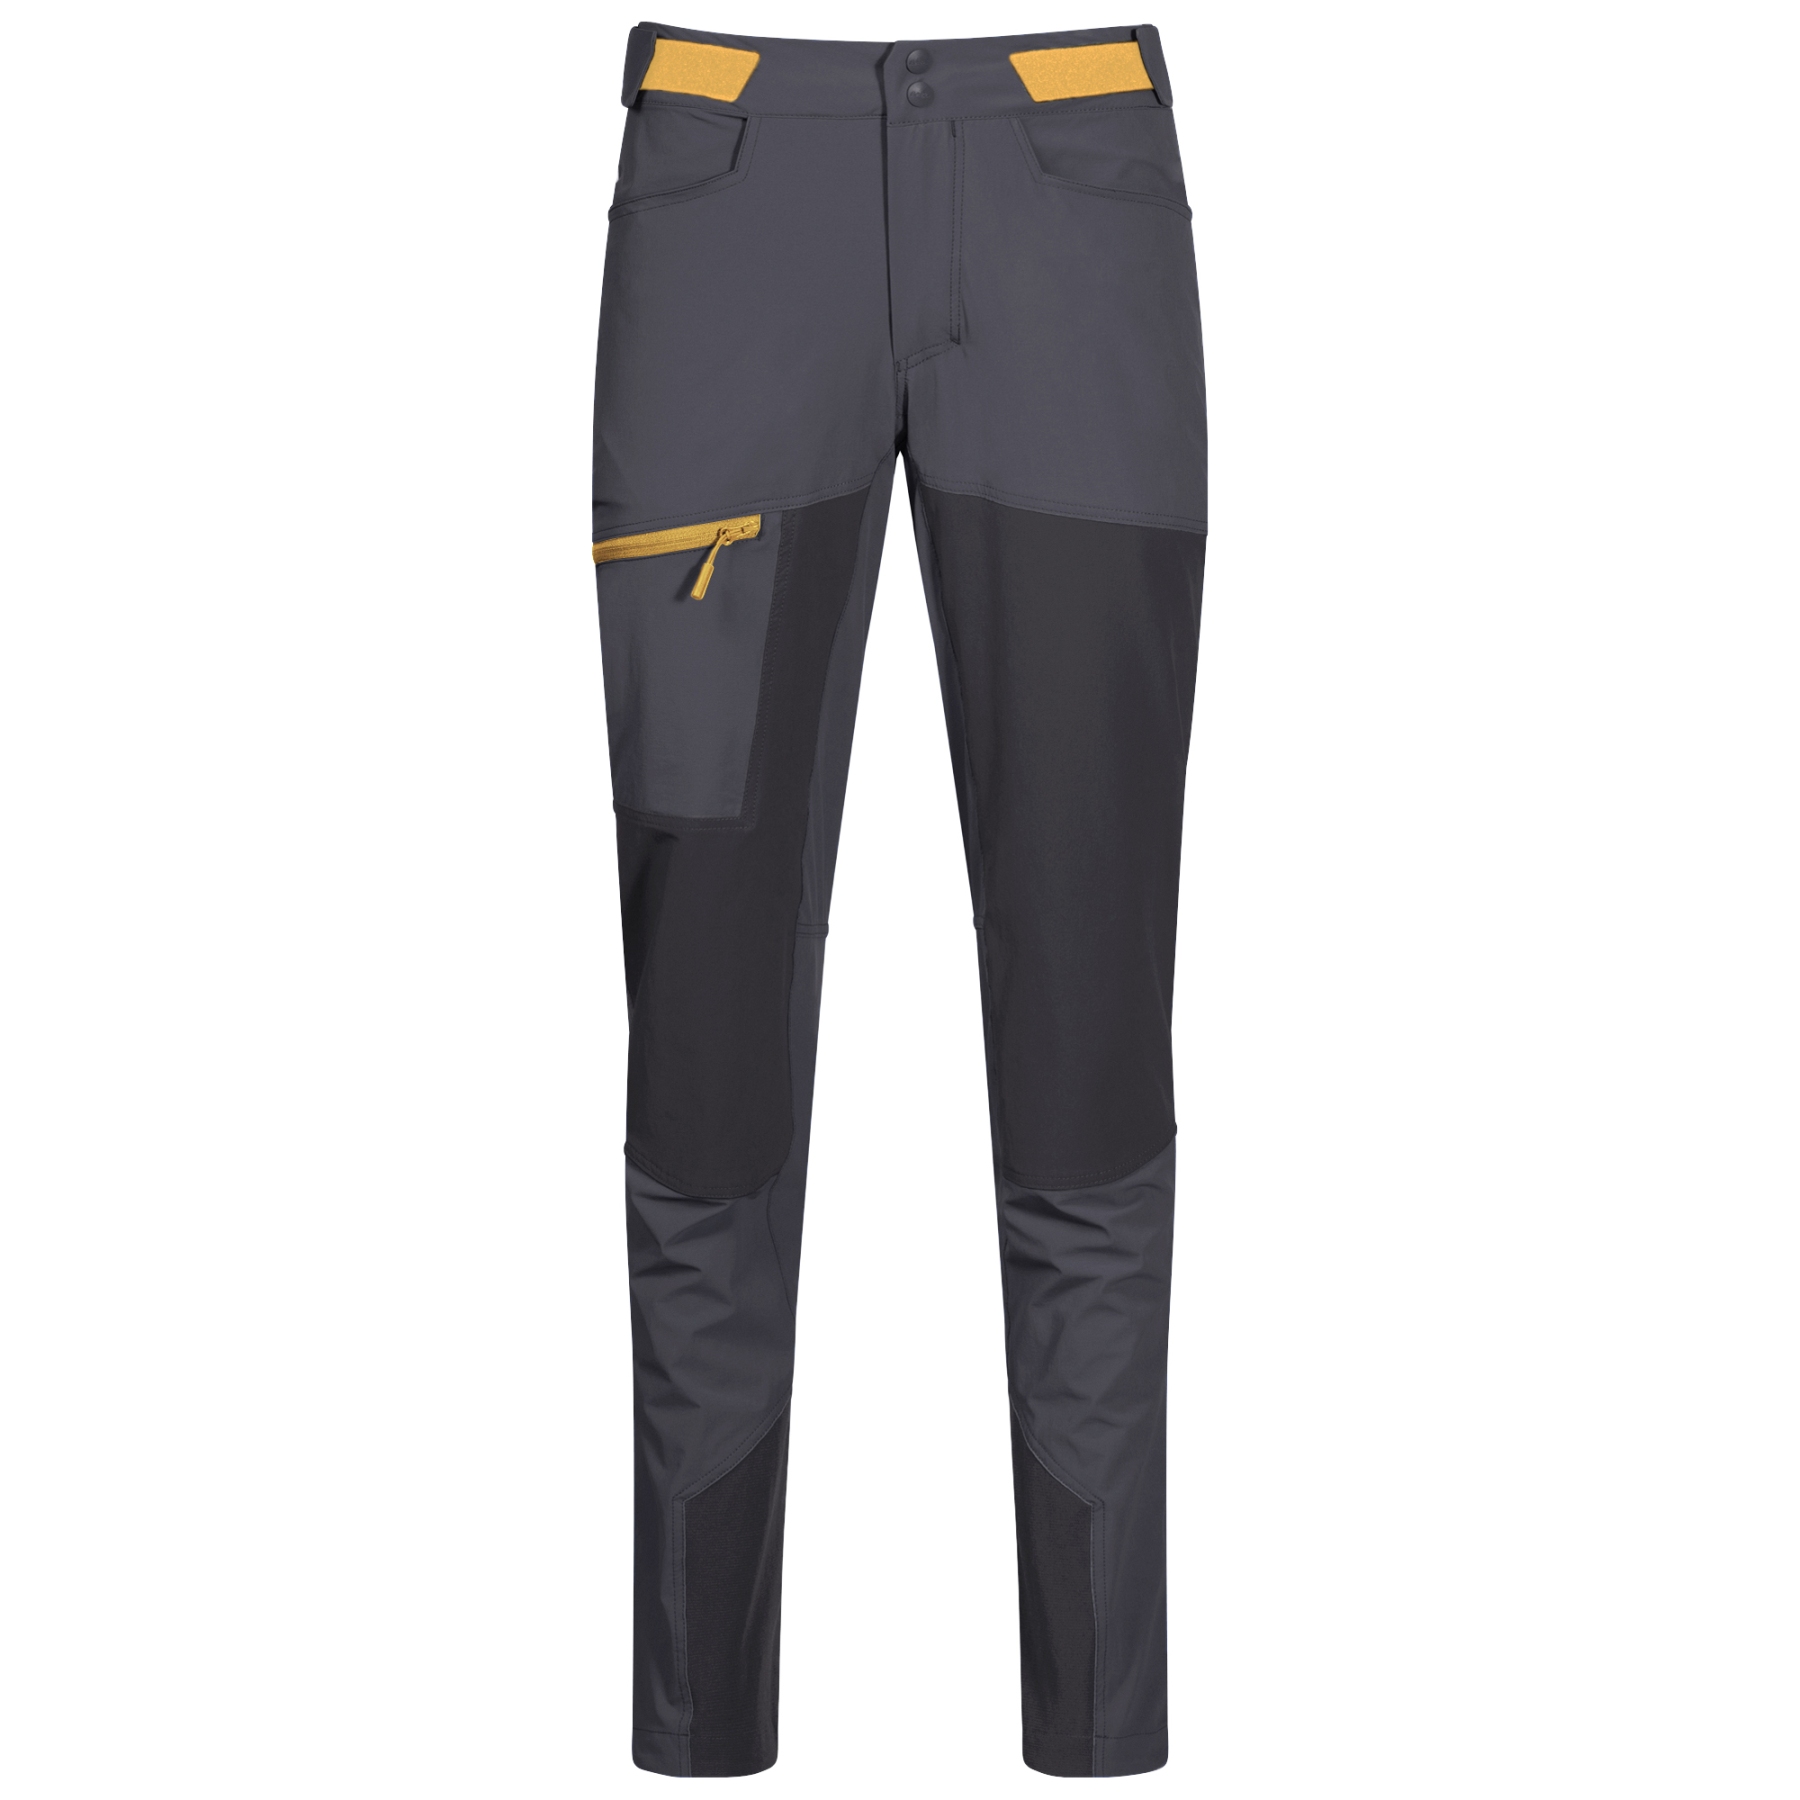 Picture of Bergans Cecilie Mountain Softshell Pants Women - solid dark grey/solid charcoal/light golden yellow